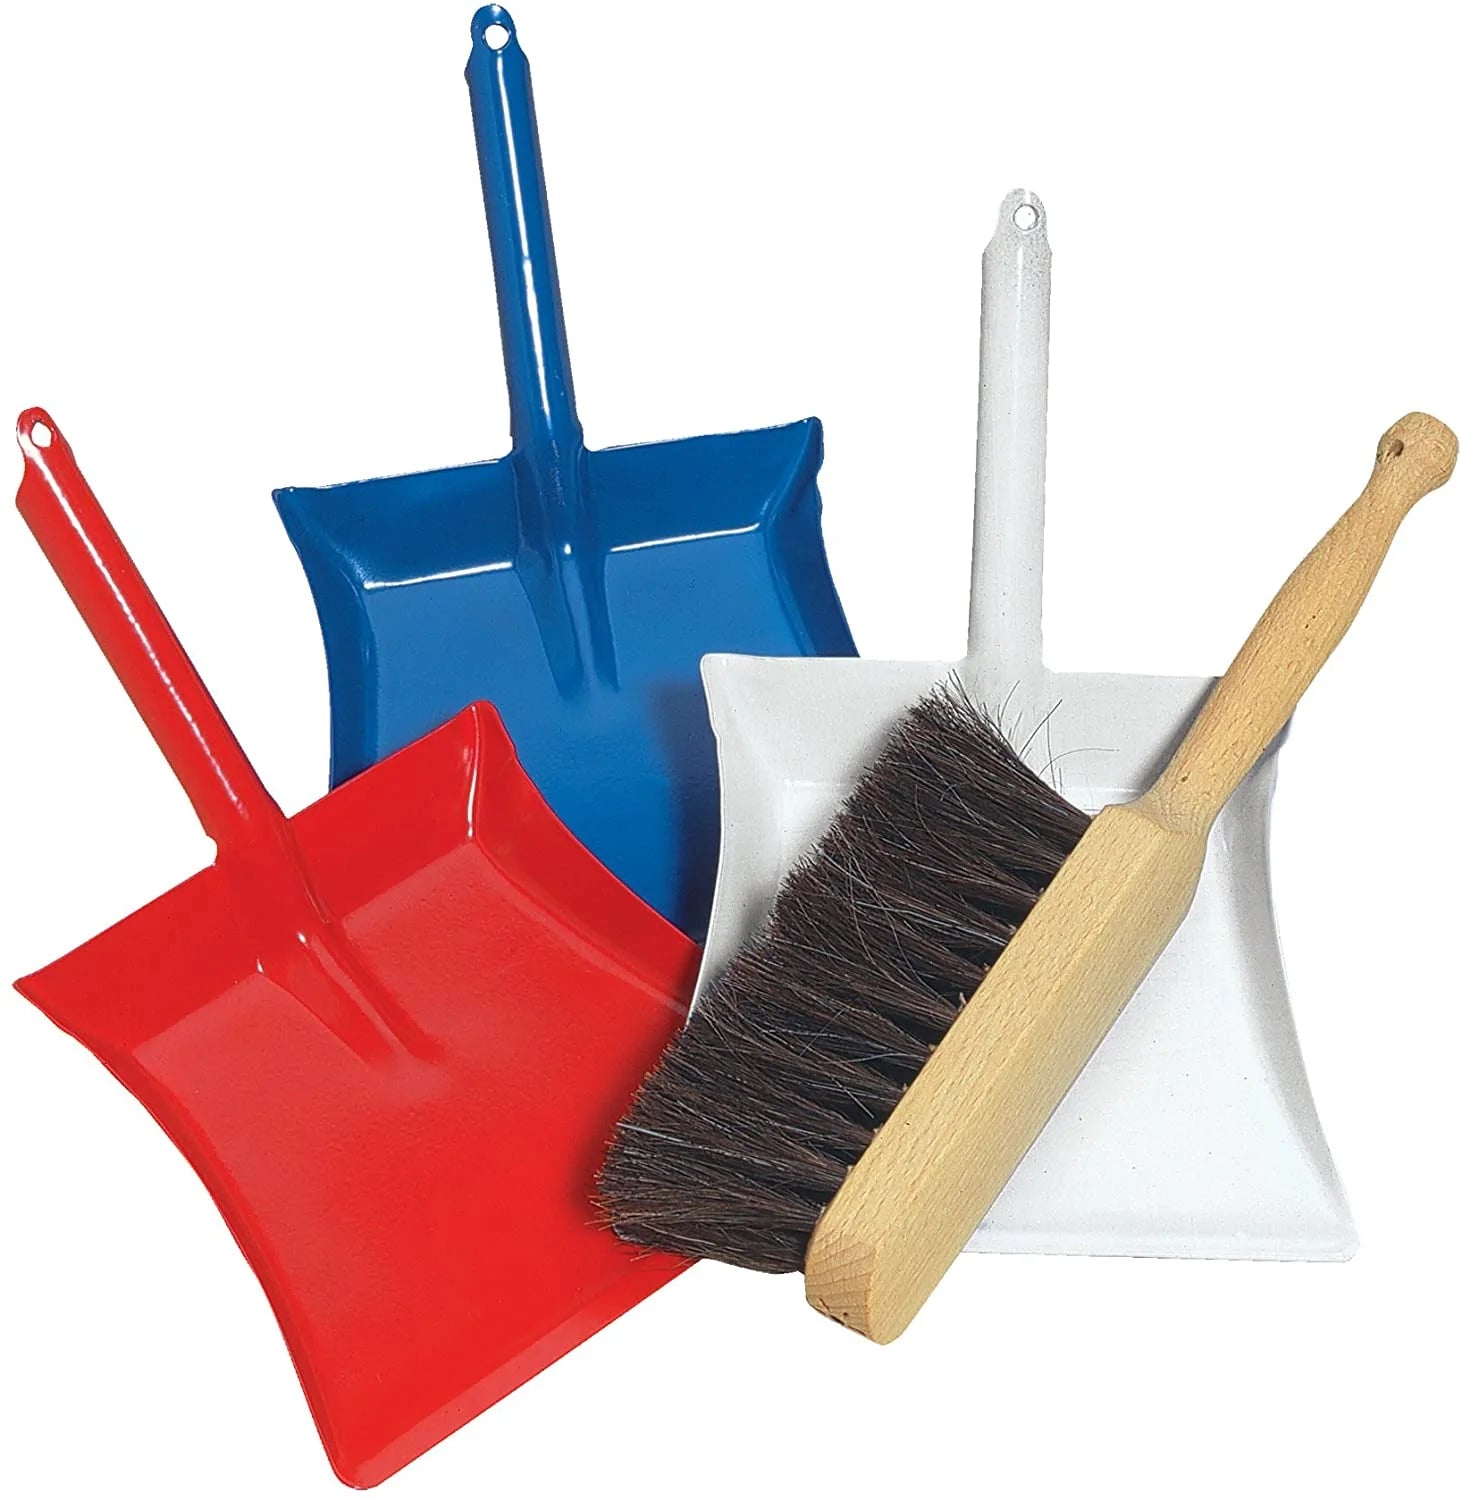 Children's Hand Brush and Dustpan Set in Red